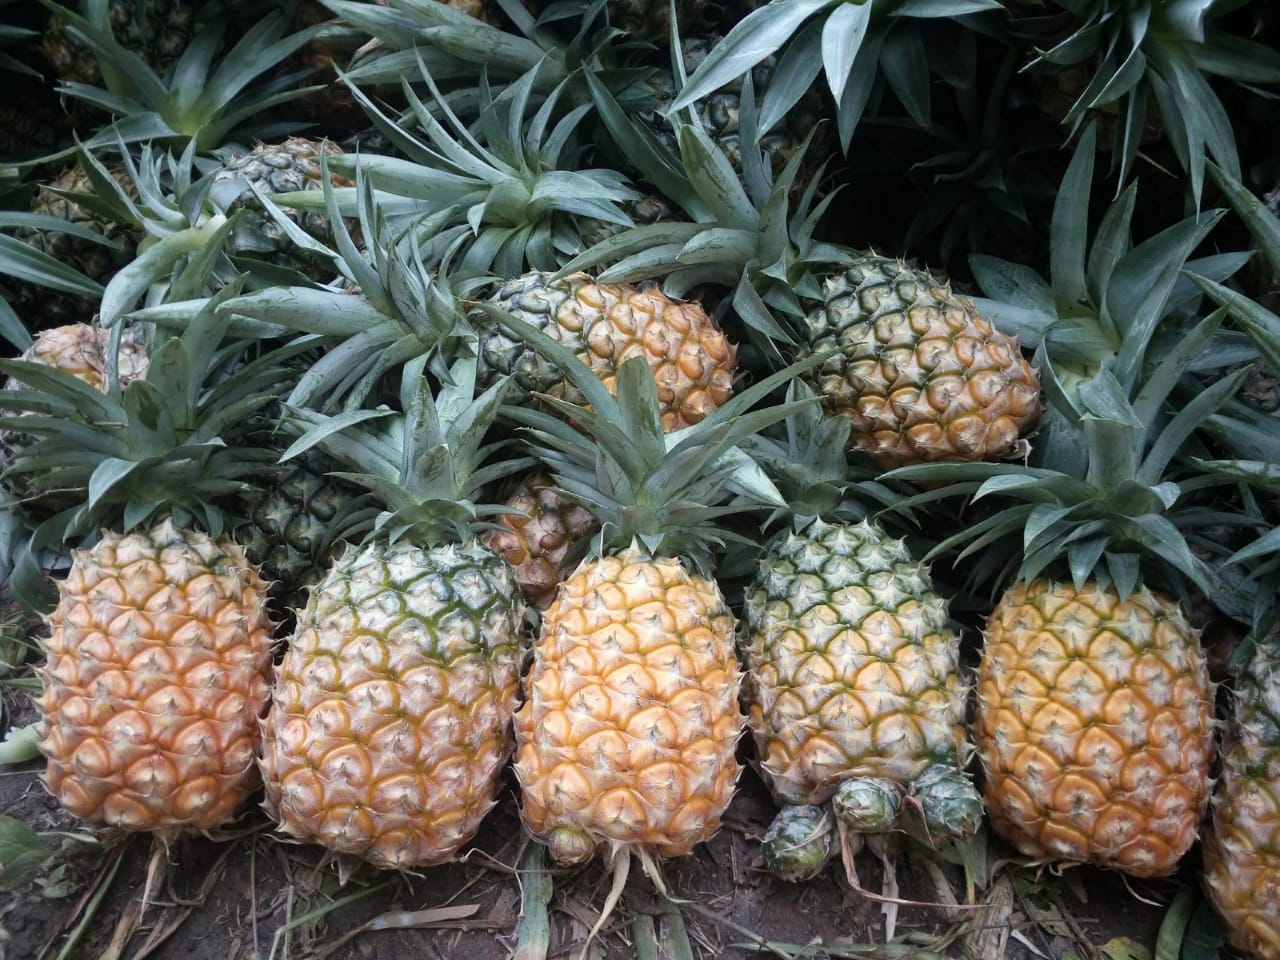 Molvom, the Pineapple village of Nagaland goes organic!